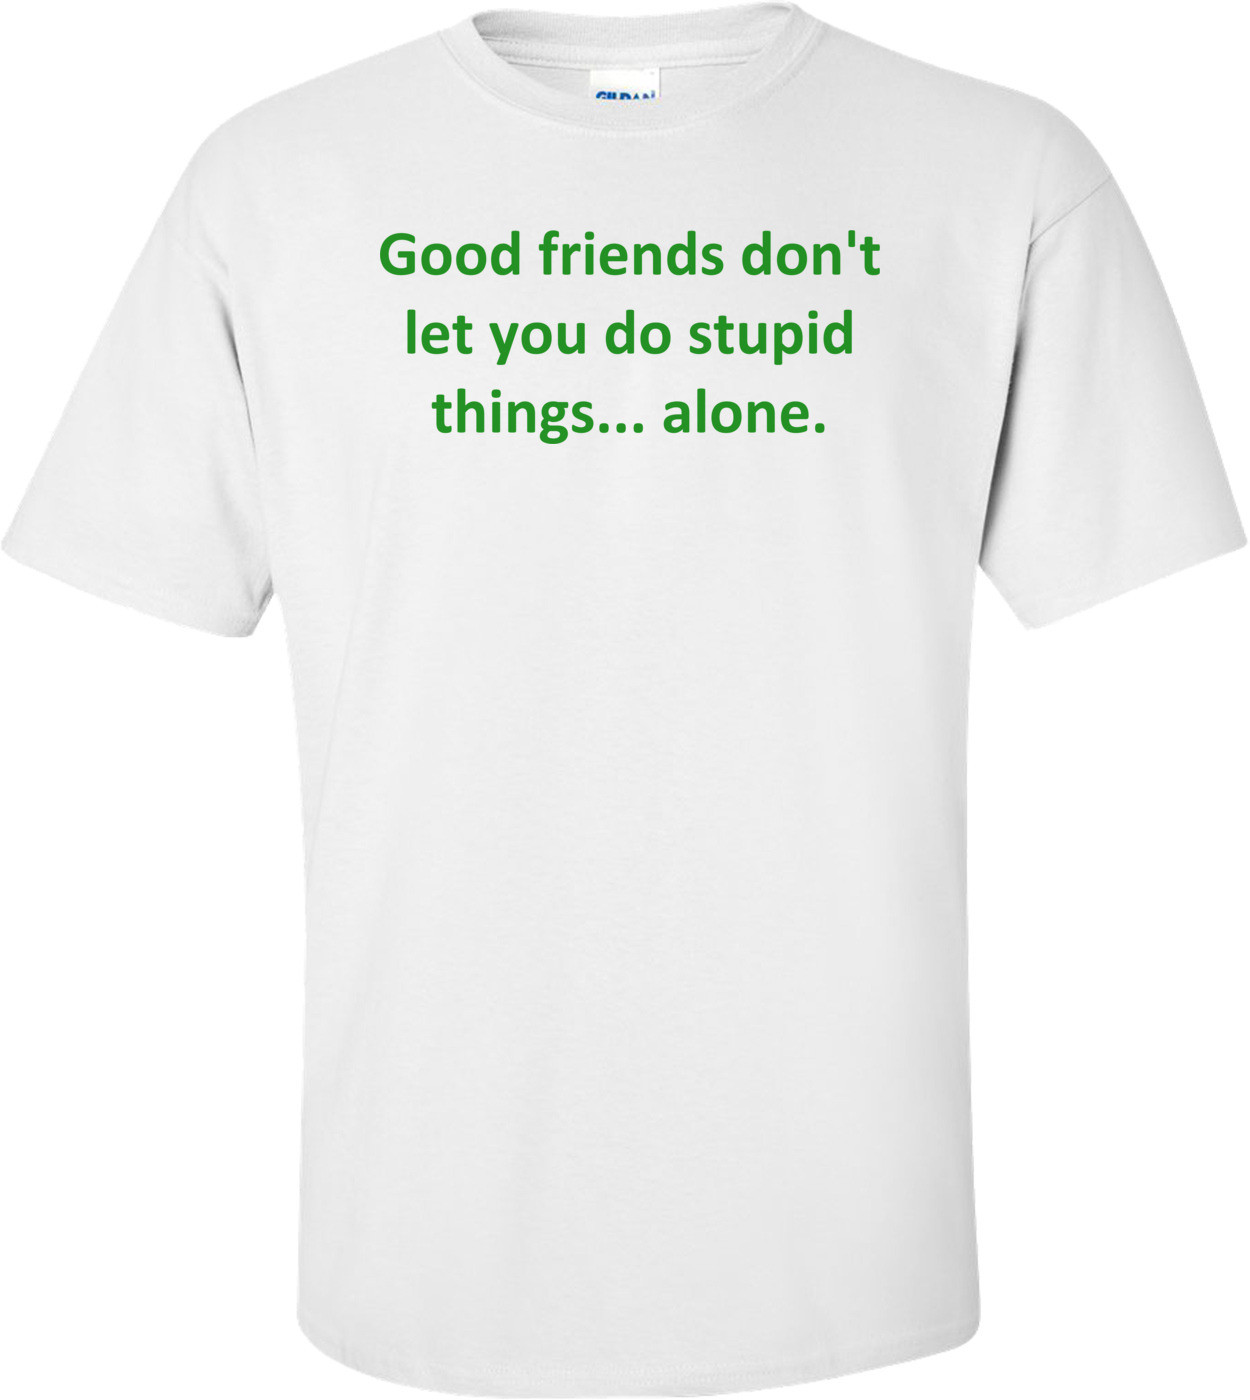 Good friends don't let you do stupid things... alone. Shirt